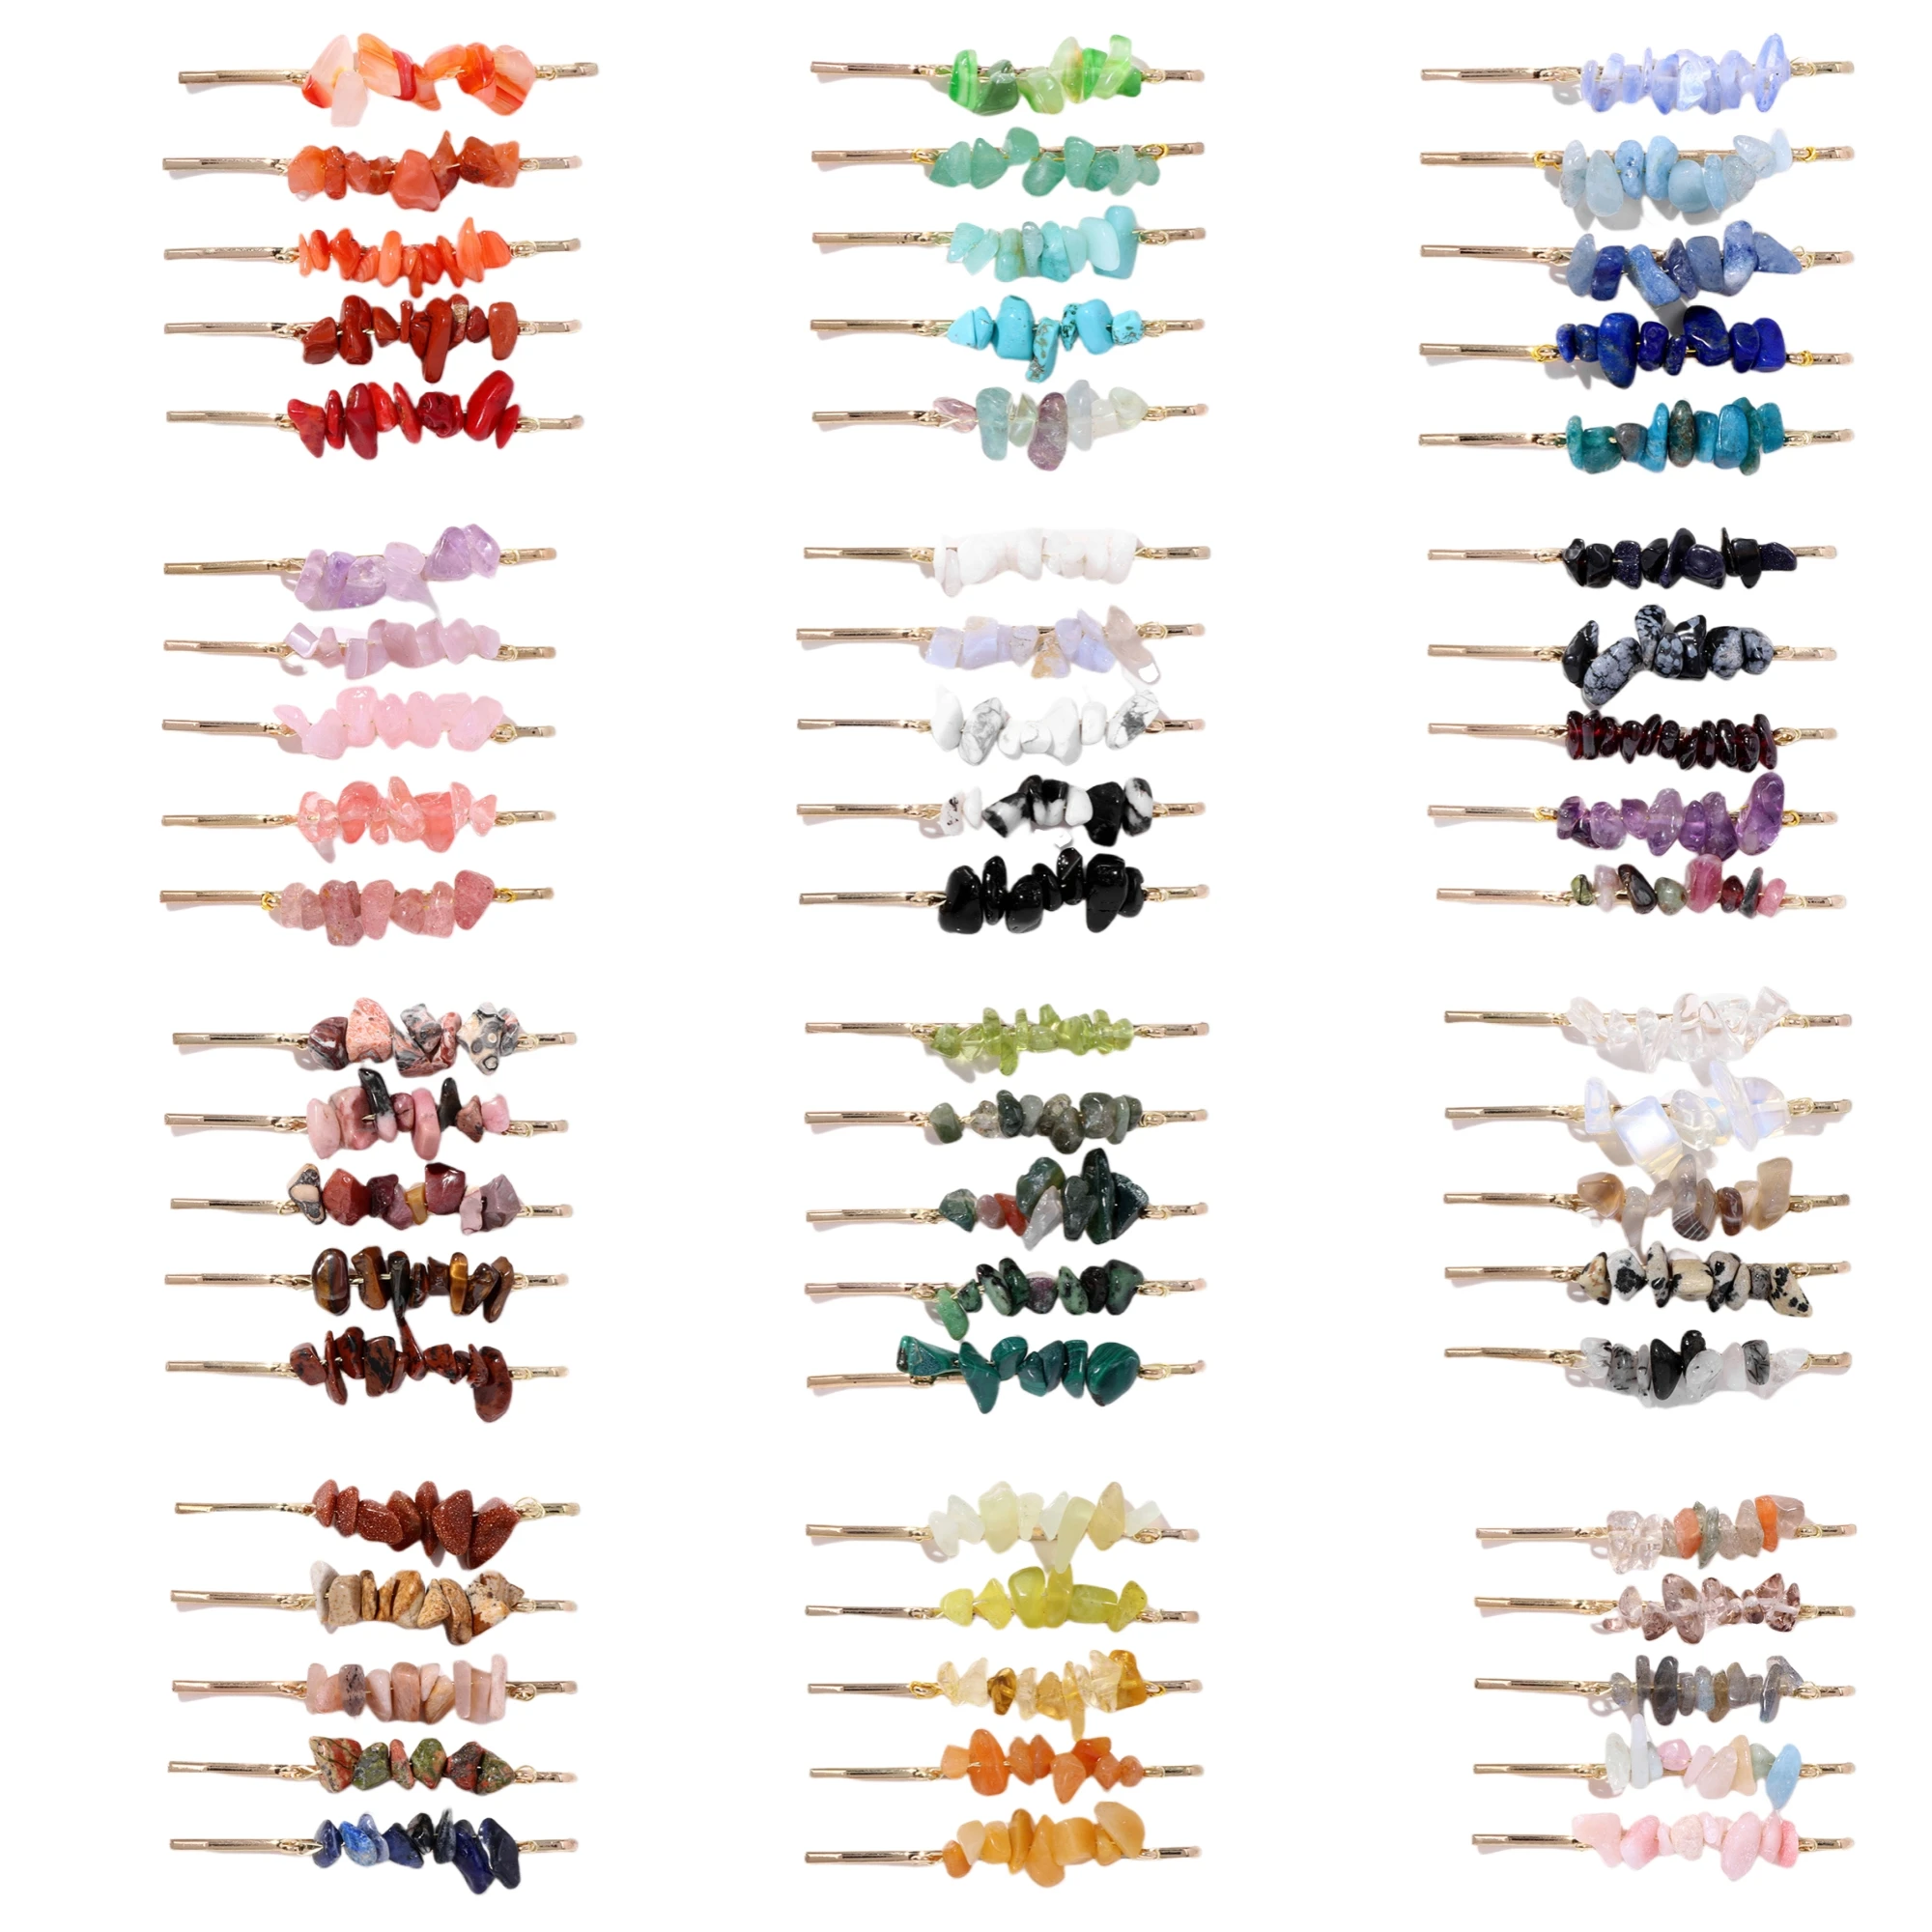 Women Gemstone Hair Clip 5PCS Natural Stone Crystal Irregular Chips Hairpins Gold Color Headwear Barrettes Girl friend Party 5pcs w27c512 ic chips w27c512 45z 28dip ic eeprom 512kbit original integrated circuits